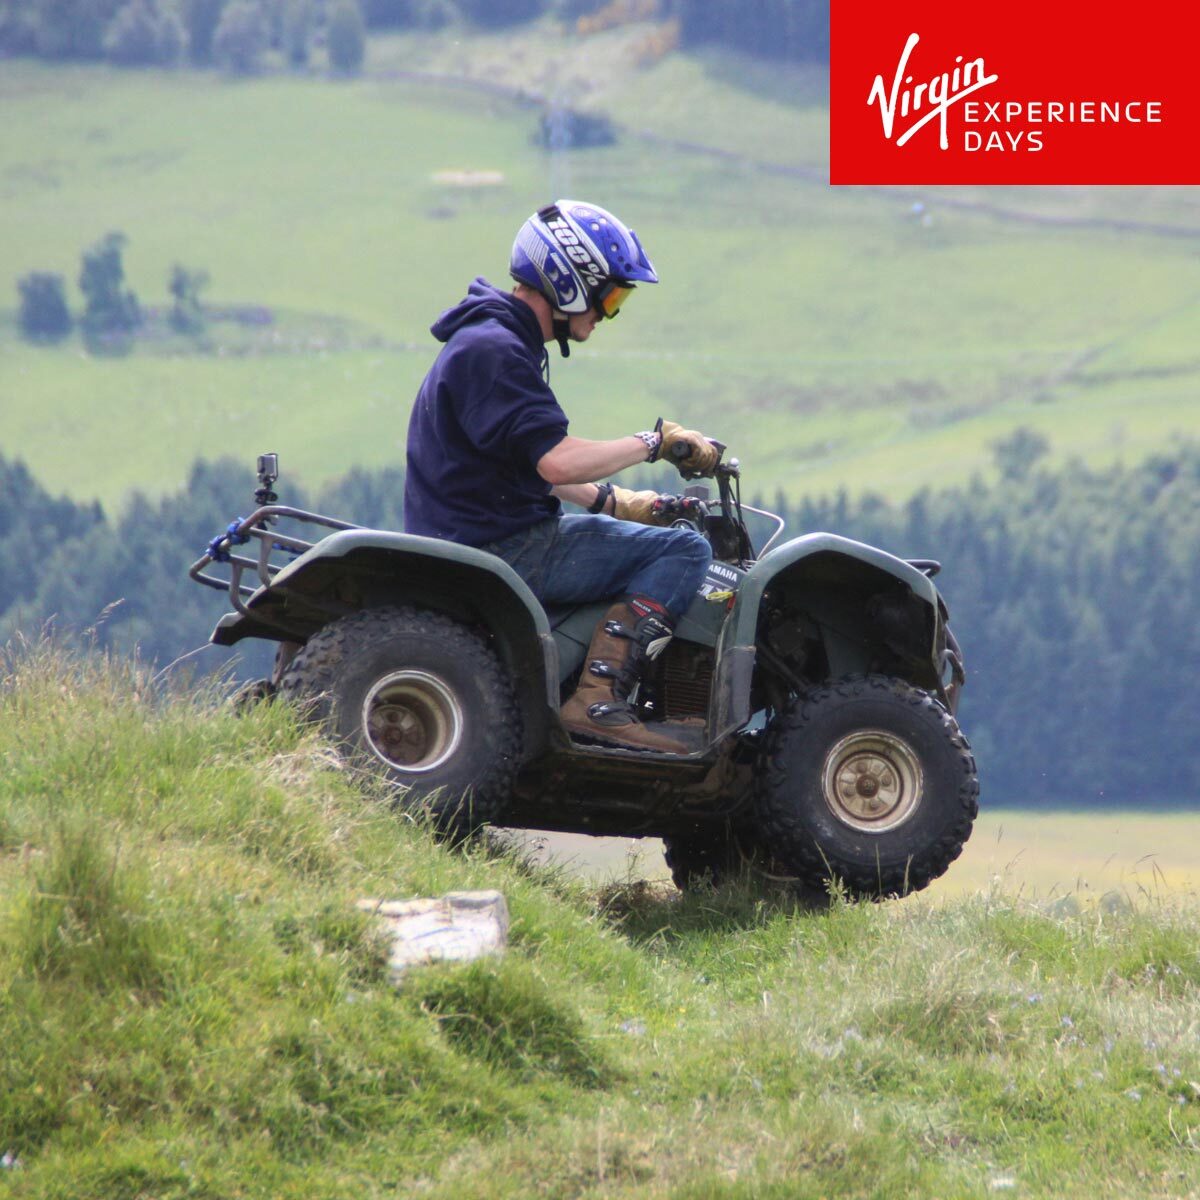 Buy Virgin Experience Quad Biking for 2 Image4 at Costco.co.uk